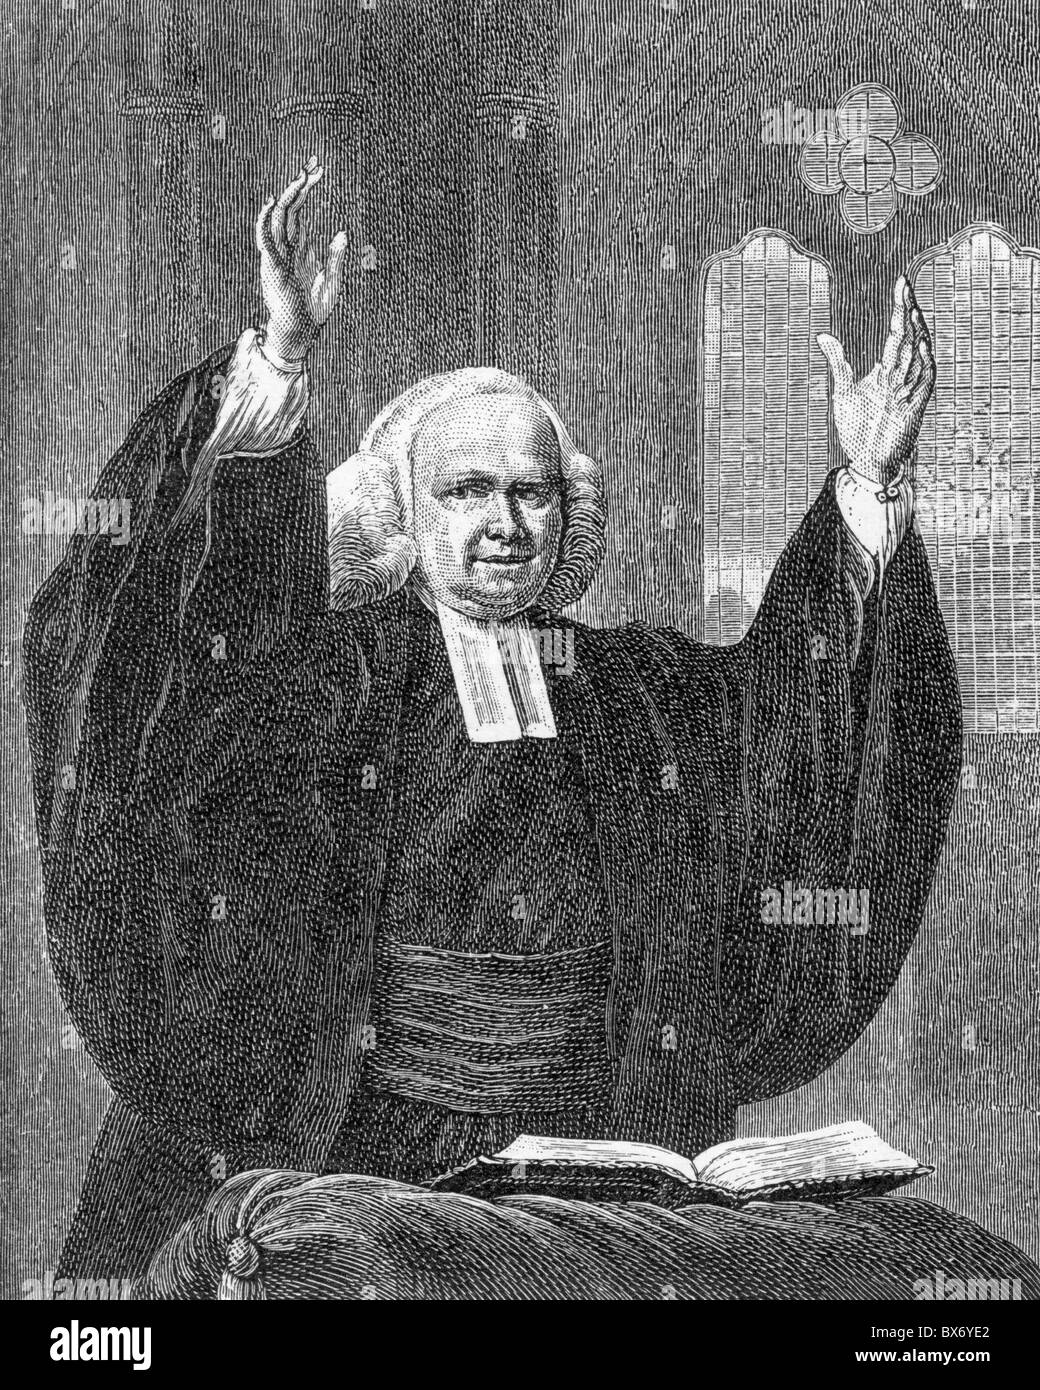 Portrait of George Whitefield, Methodism founder and exponent of the Great Awakening in England; Black and White Illustration; Stock Photo